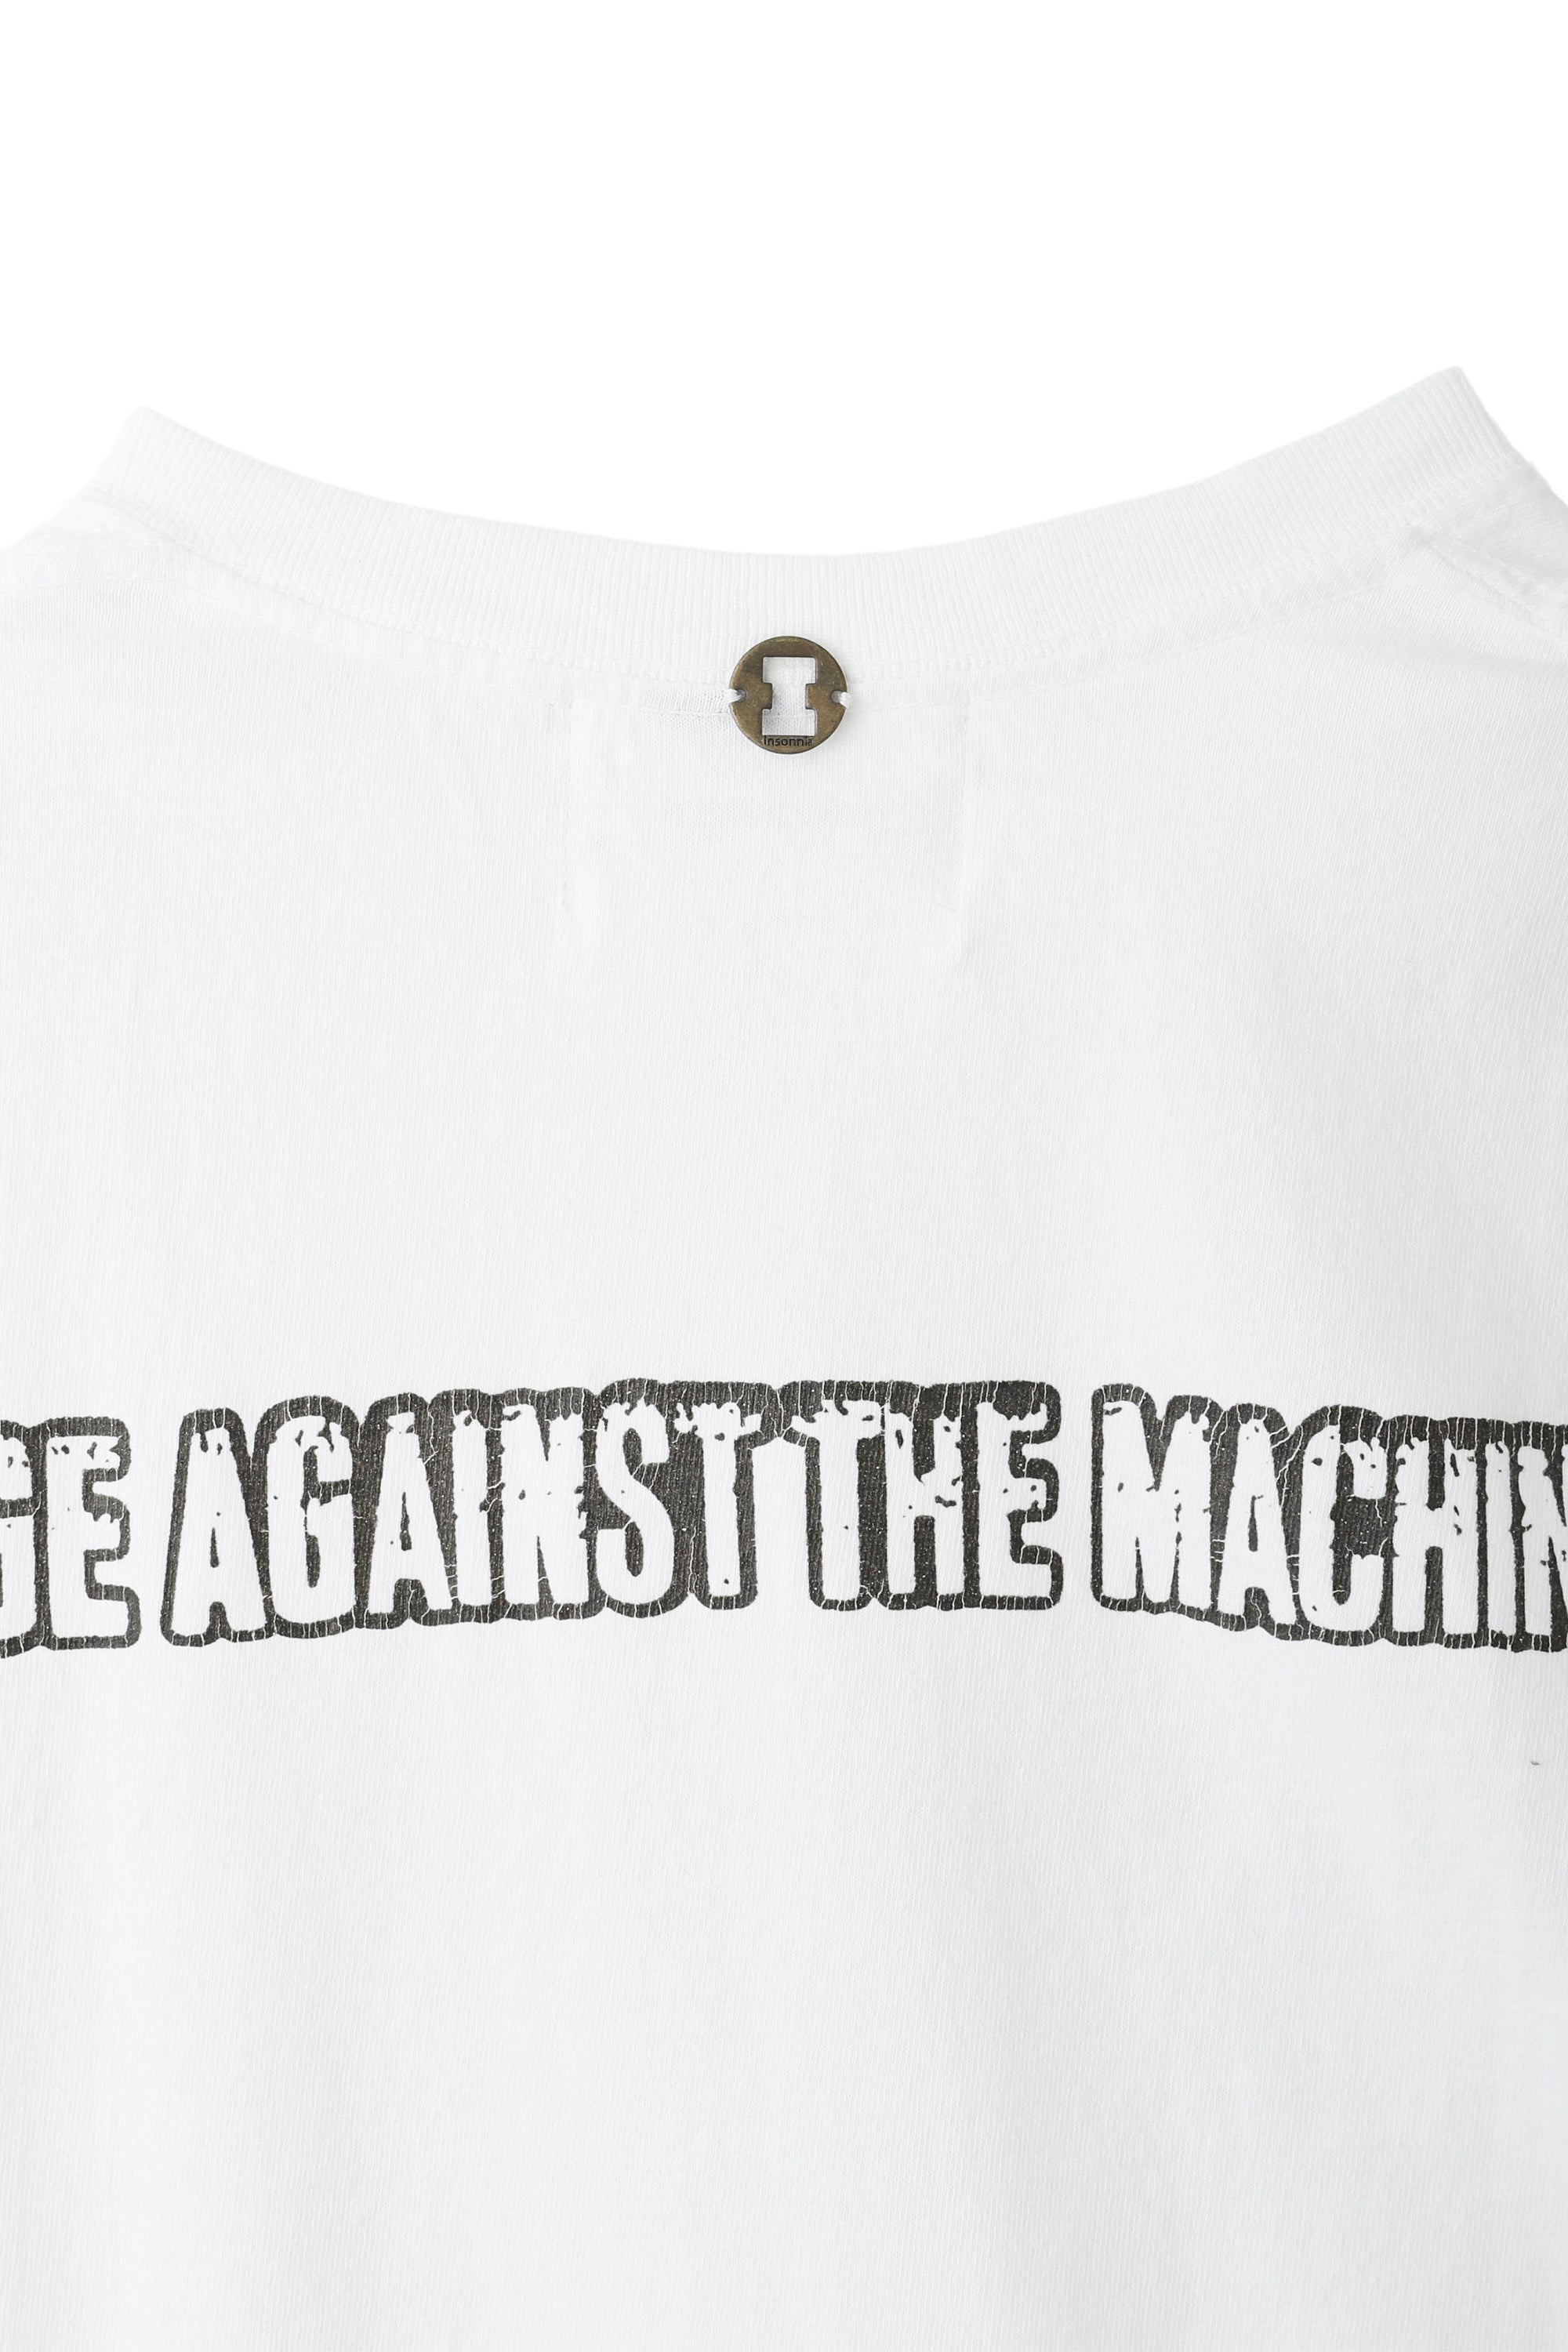 × RAGE AGAINST THE MACHINE BEYON THE LAW TEE